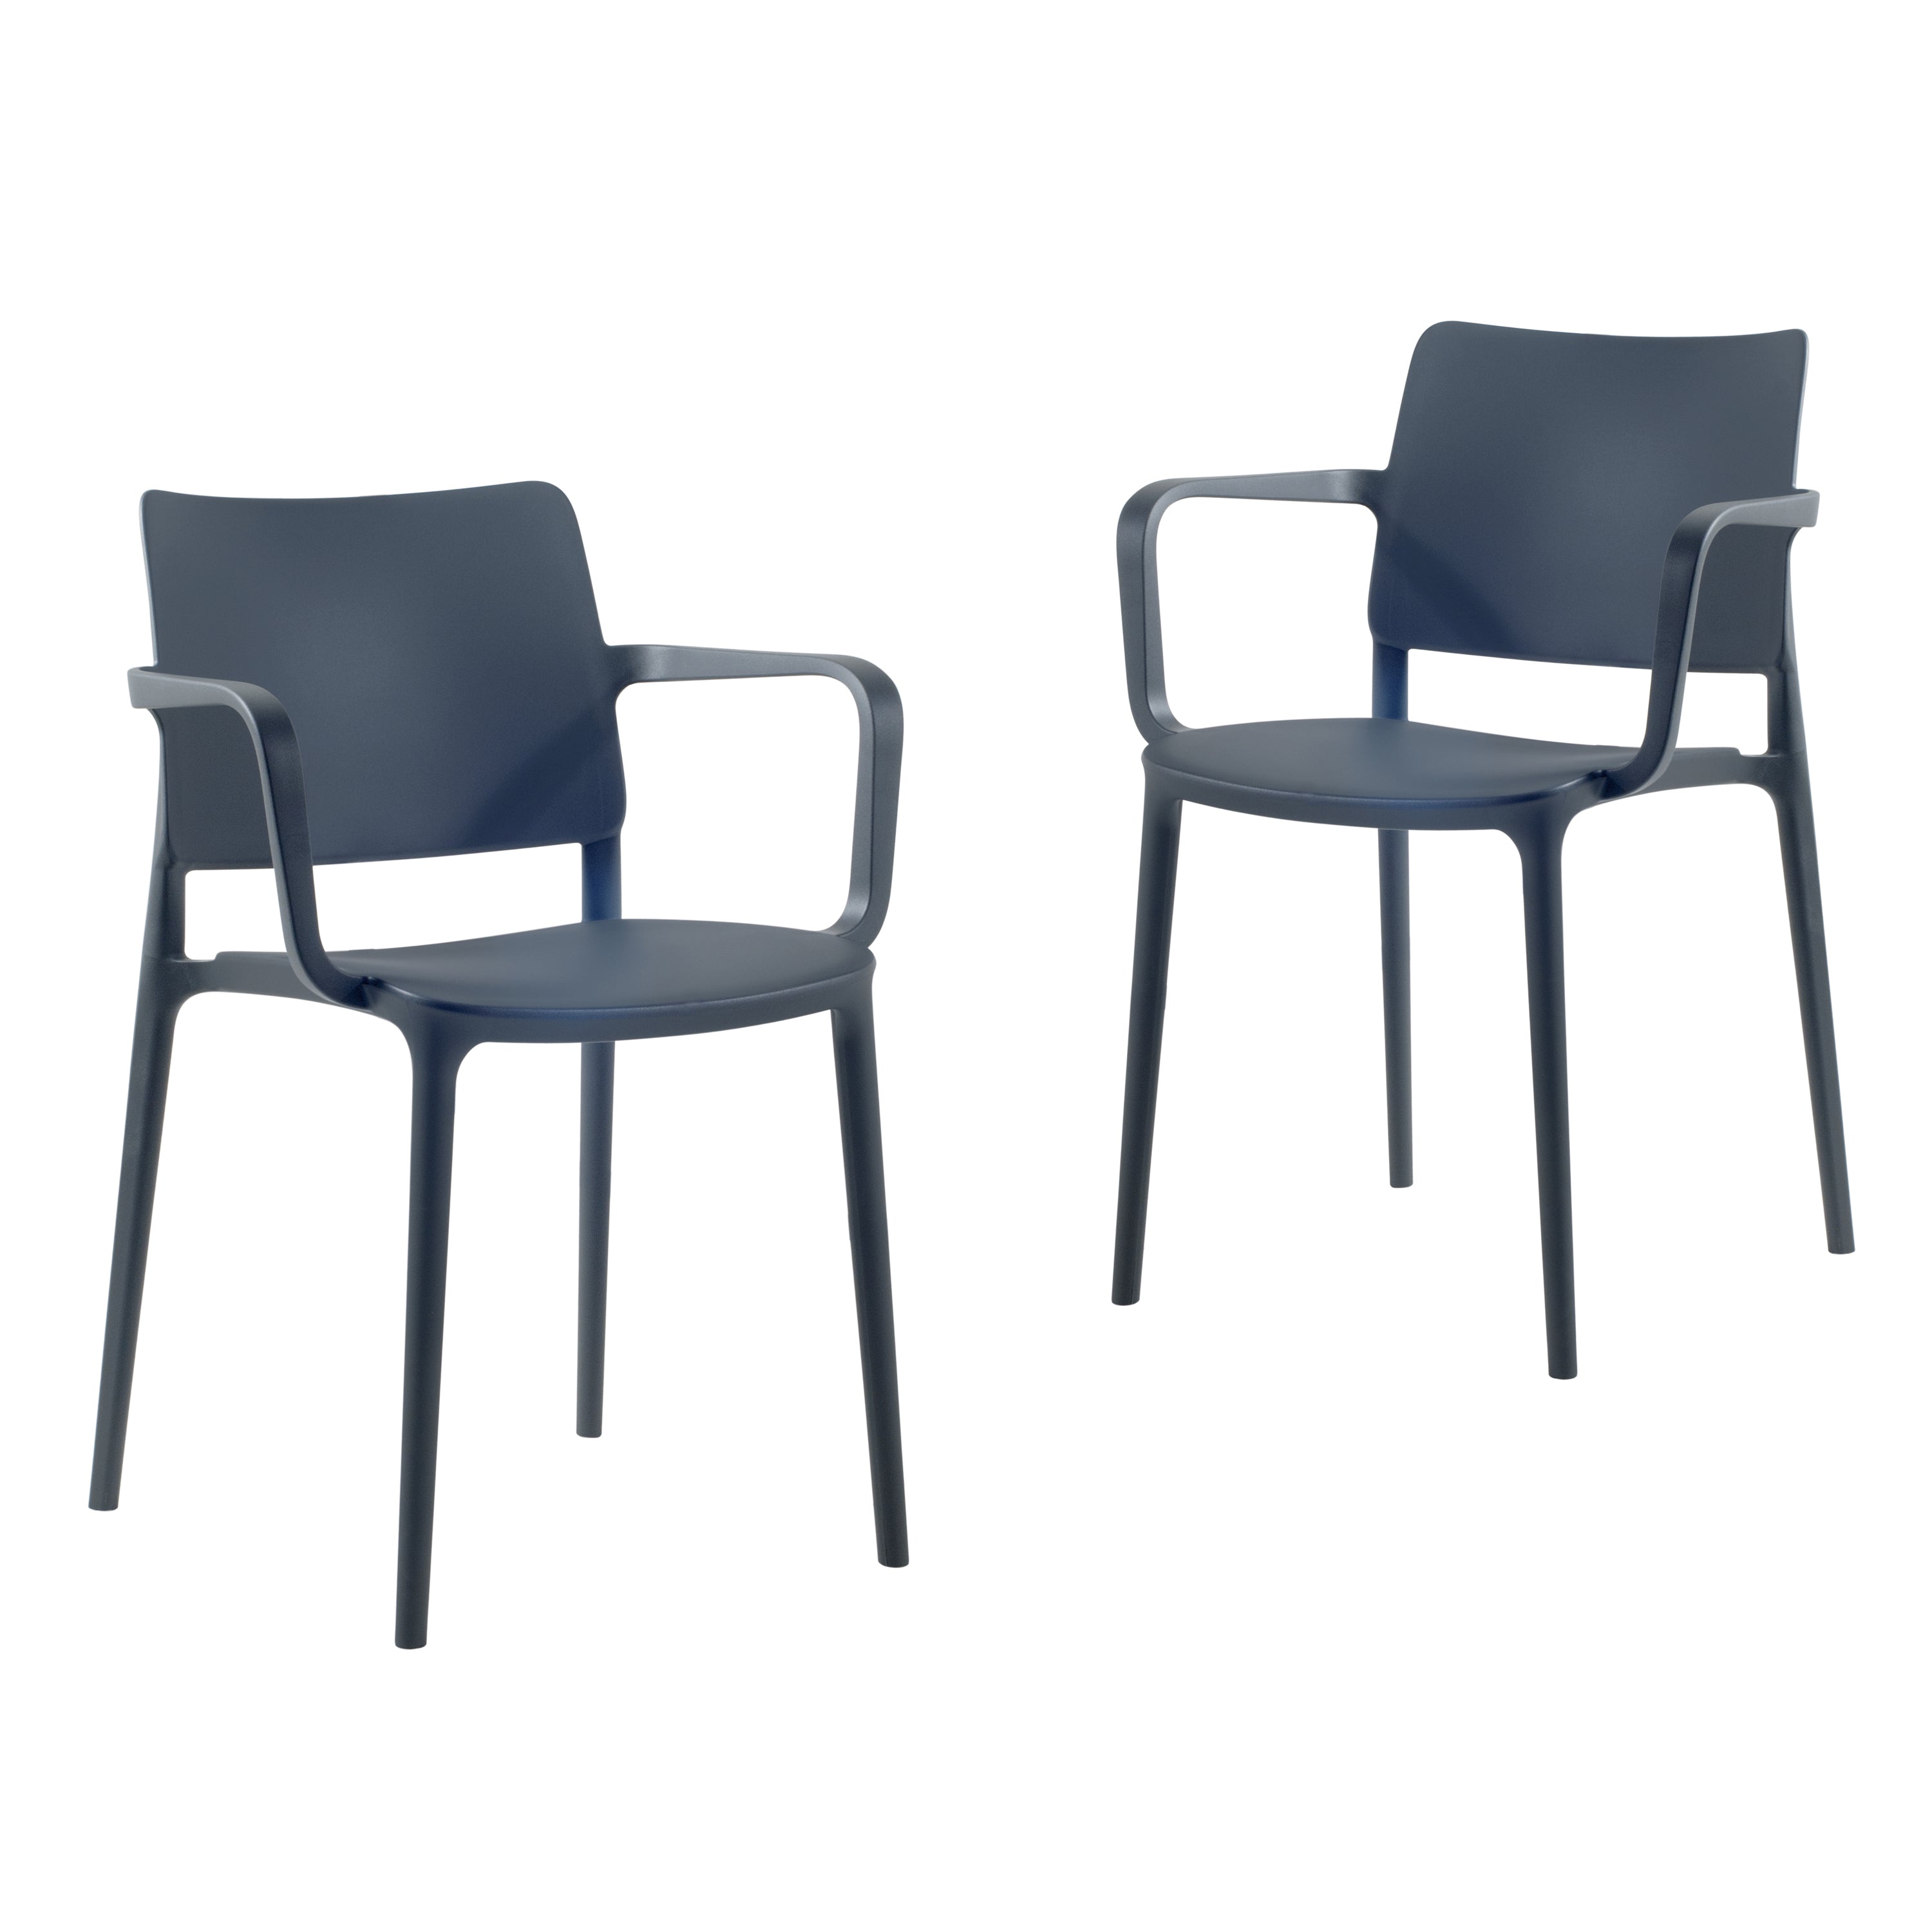 Cleo Arm Patio Dining Chair in Anthracite - (Set of 2)